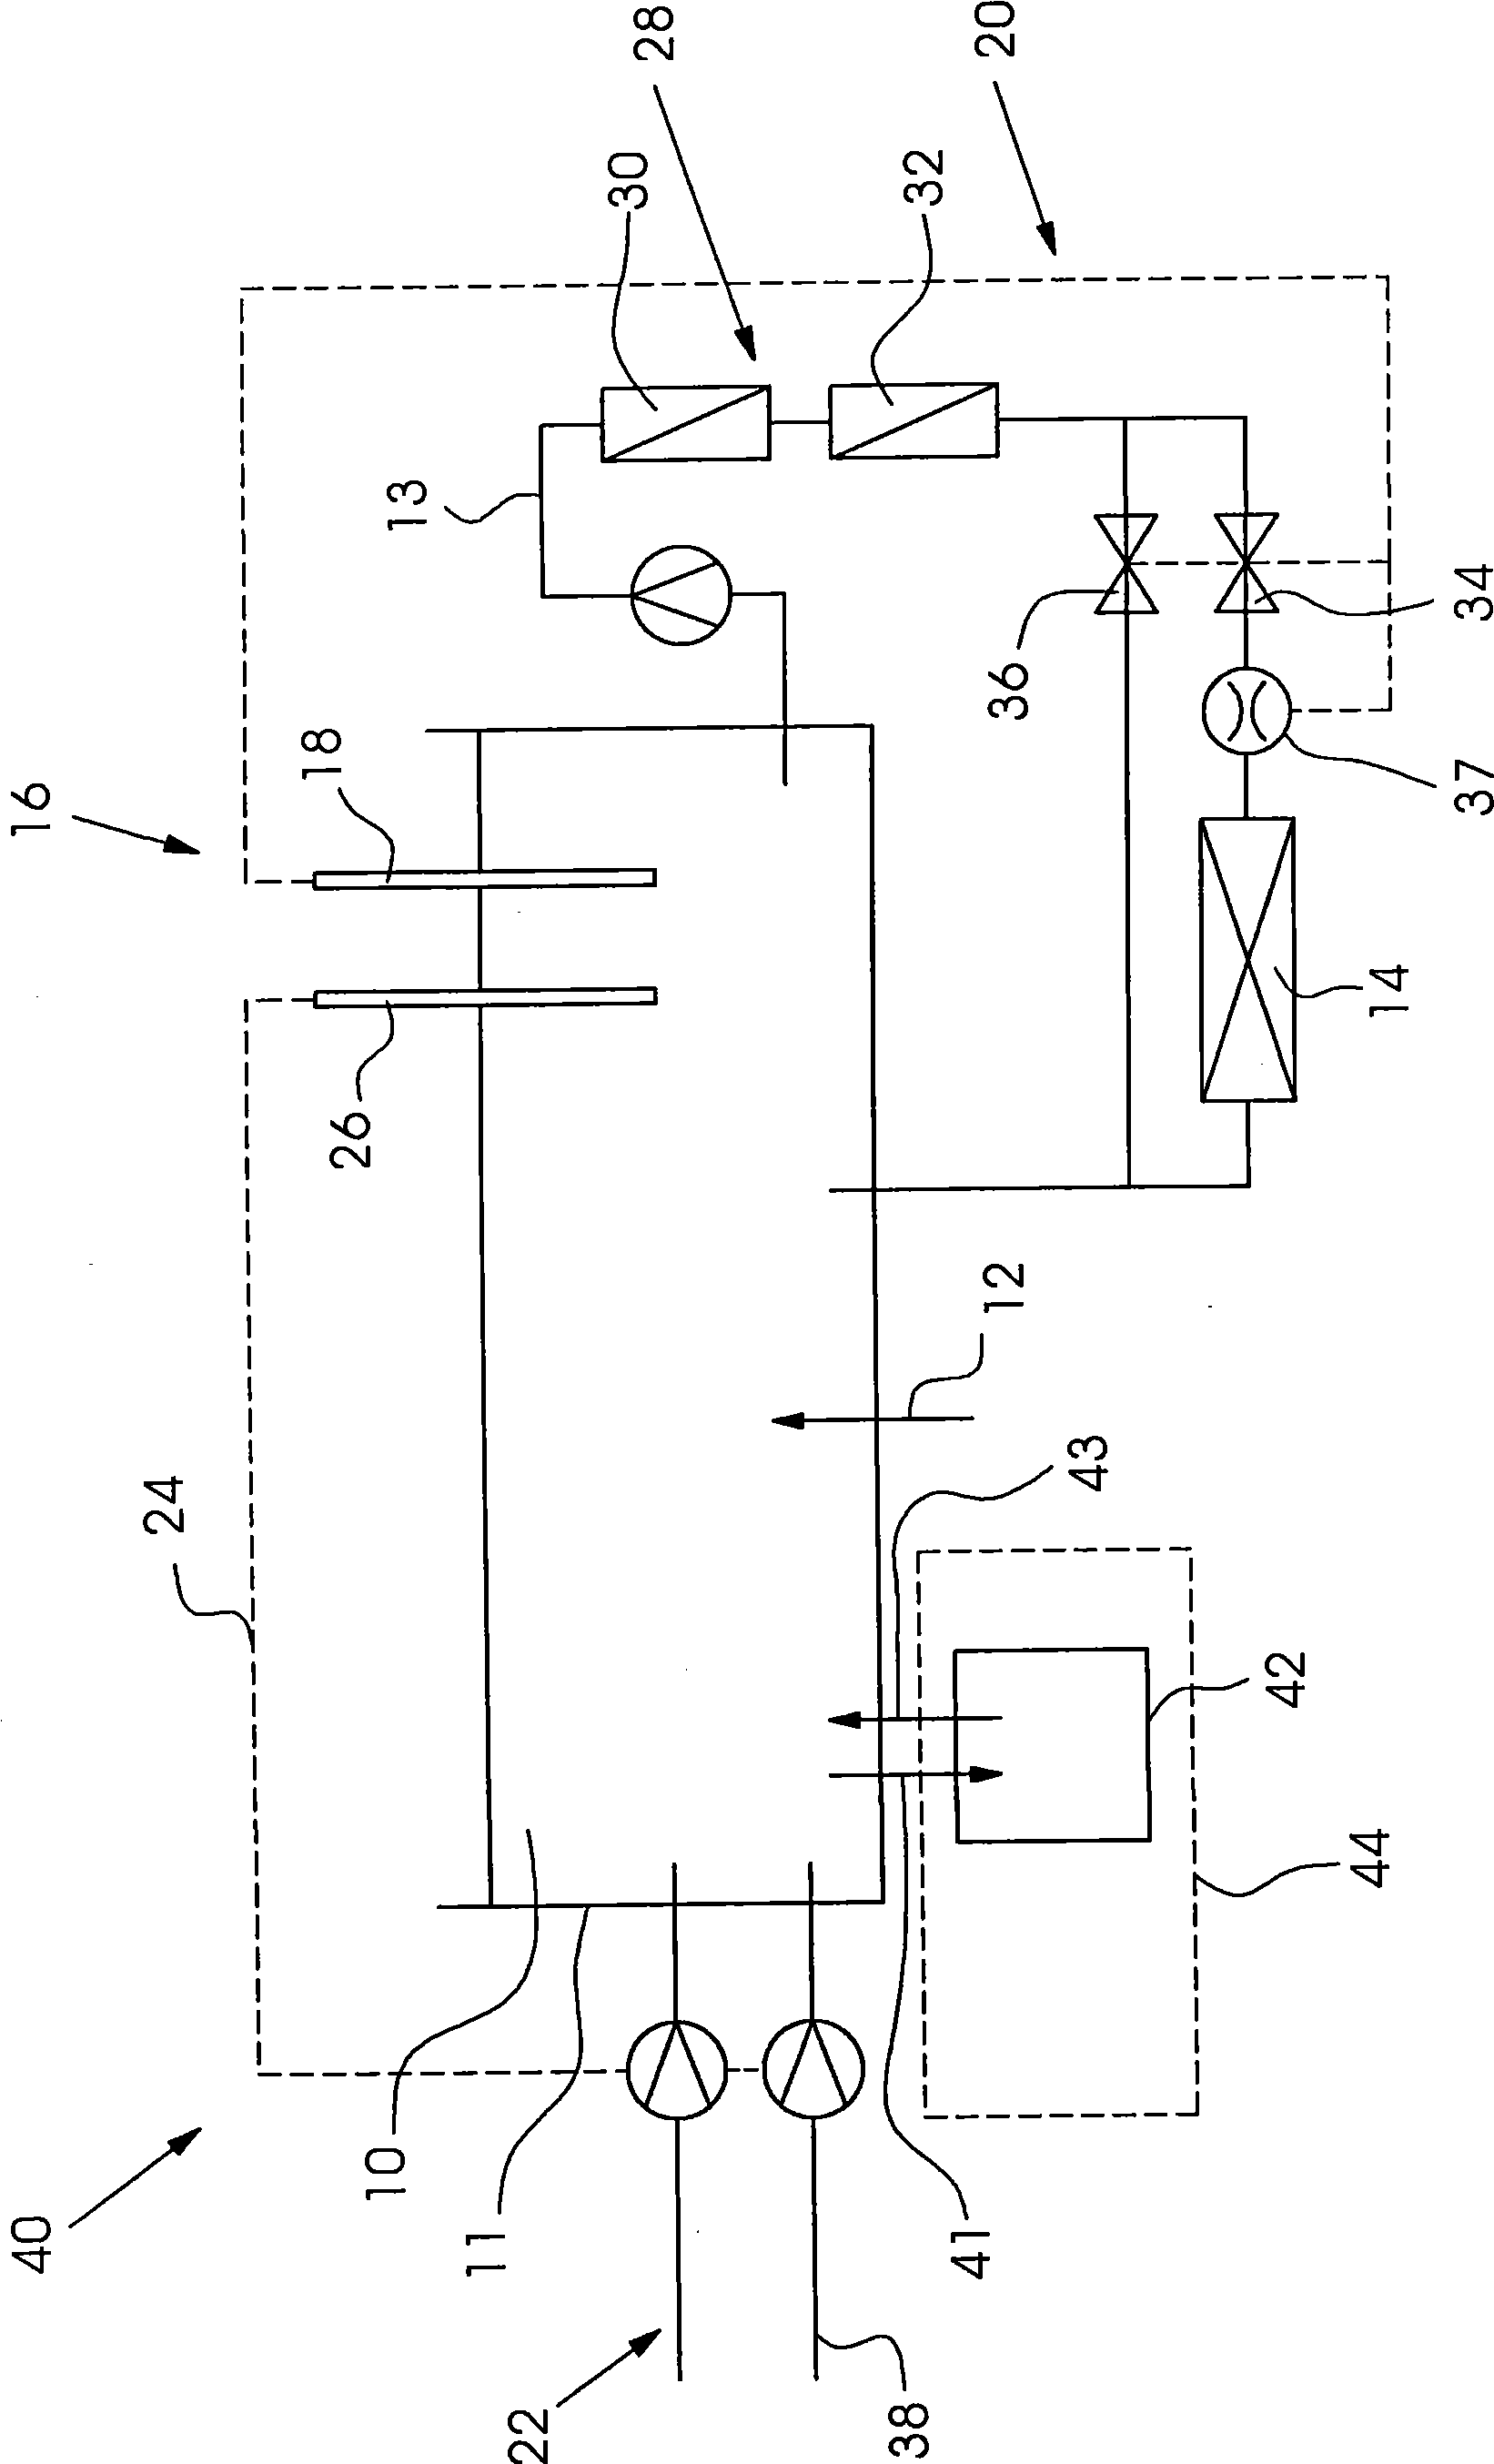 Apparatus and method for conditioning dampening solution for an offset printing press